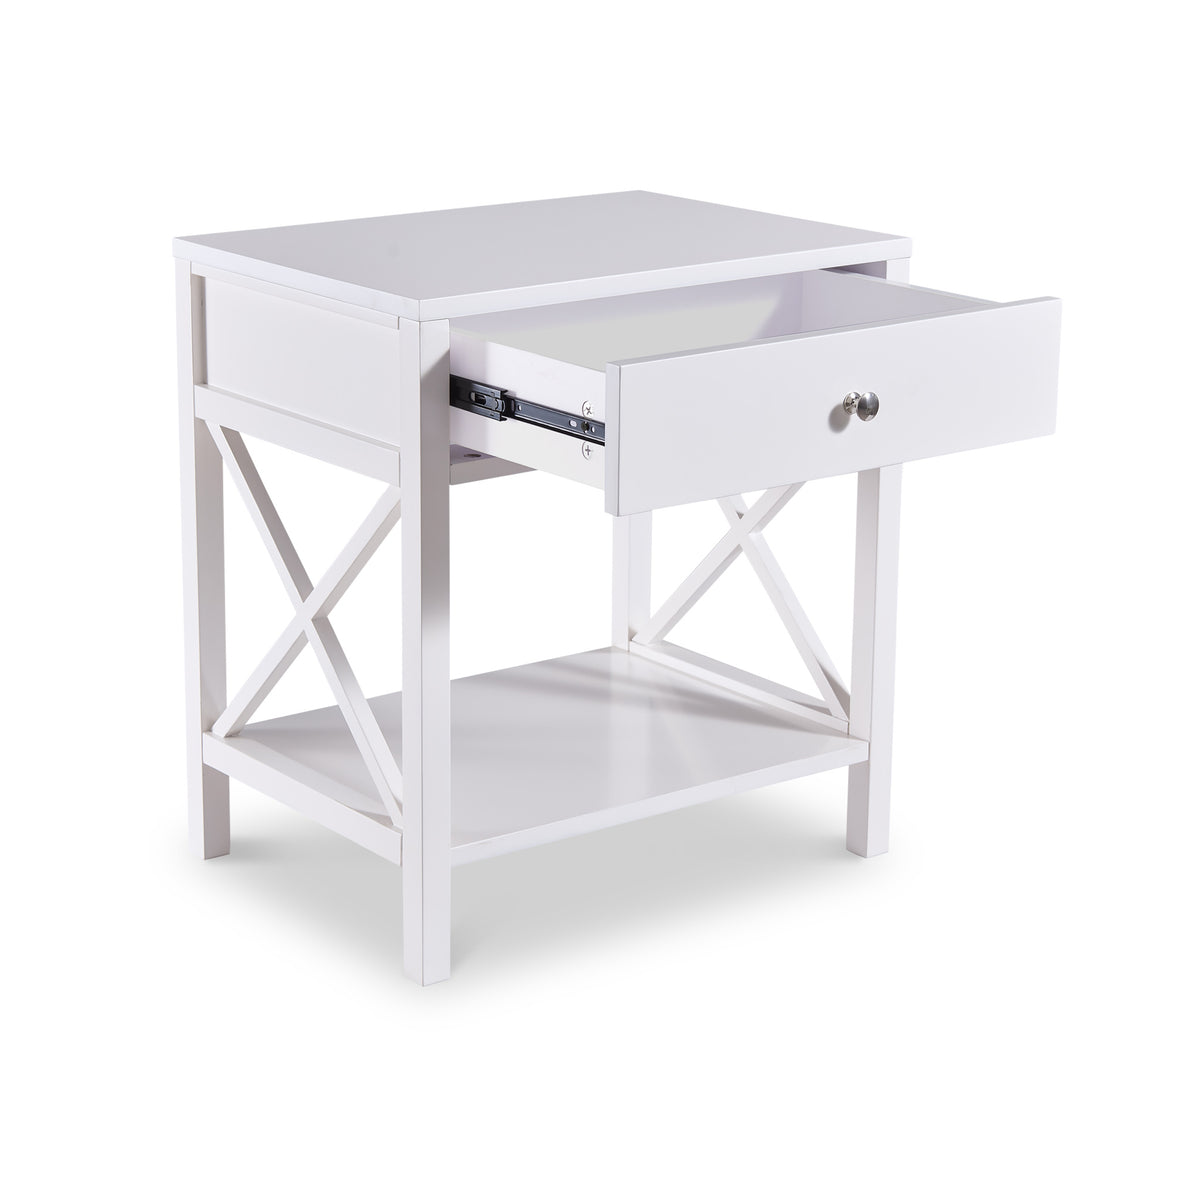 Leighton White 1 Drawer Bedside Table from Roseland Furniture